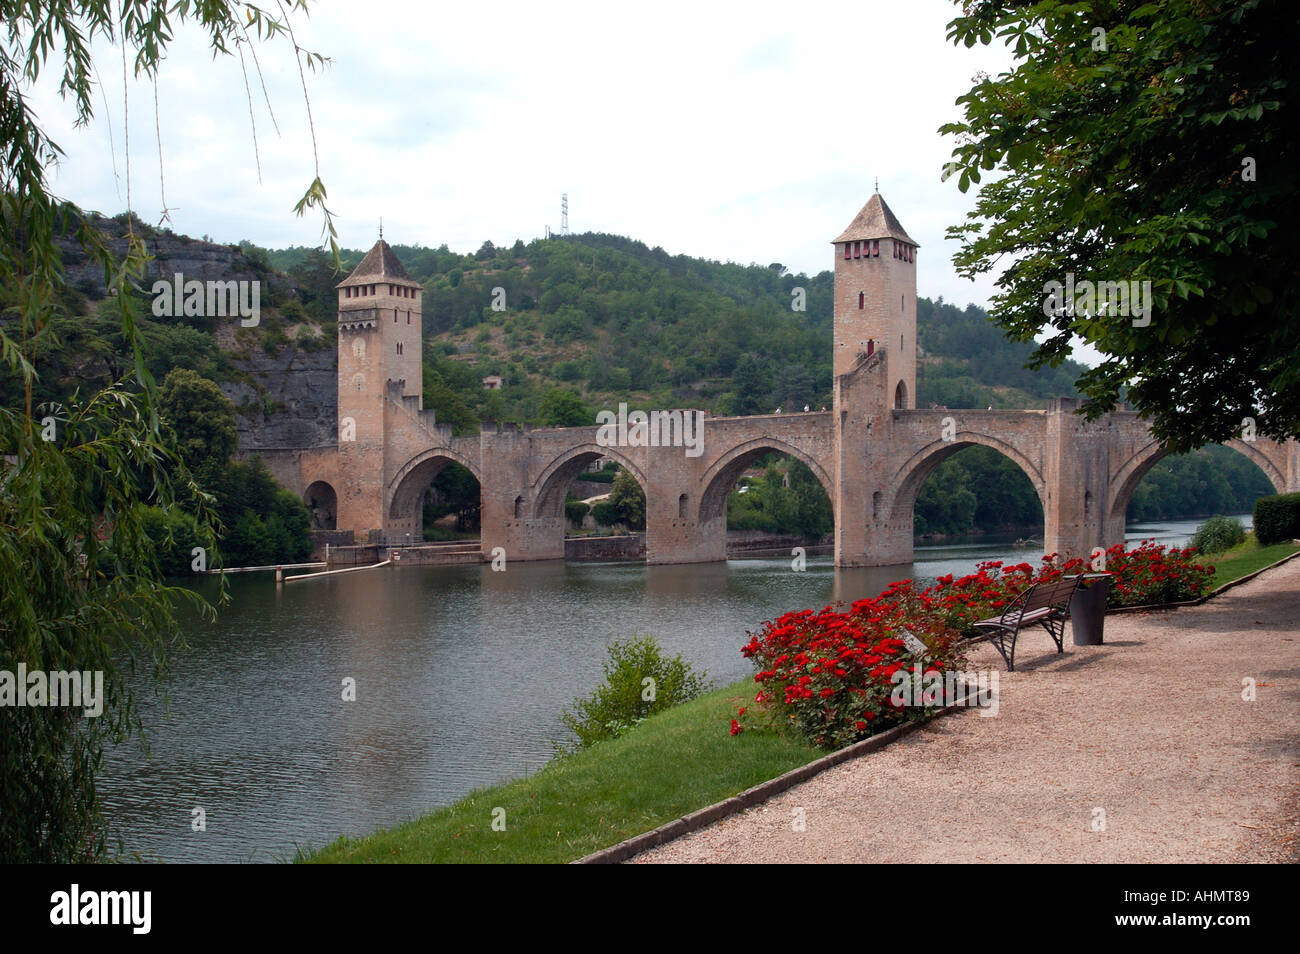 The Pont Valentre Cahors one of the few remaining 14th century fortified towered bridges in Europe  Stock Photo